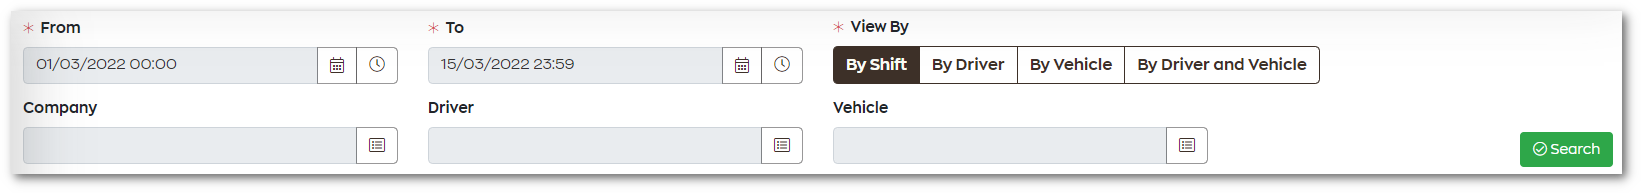 driver_shifts_report_filters.png